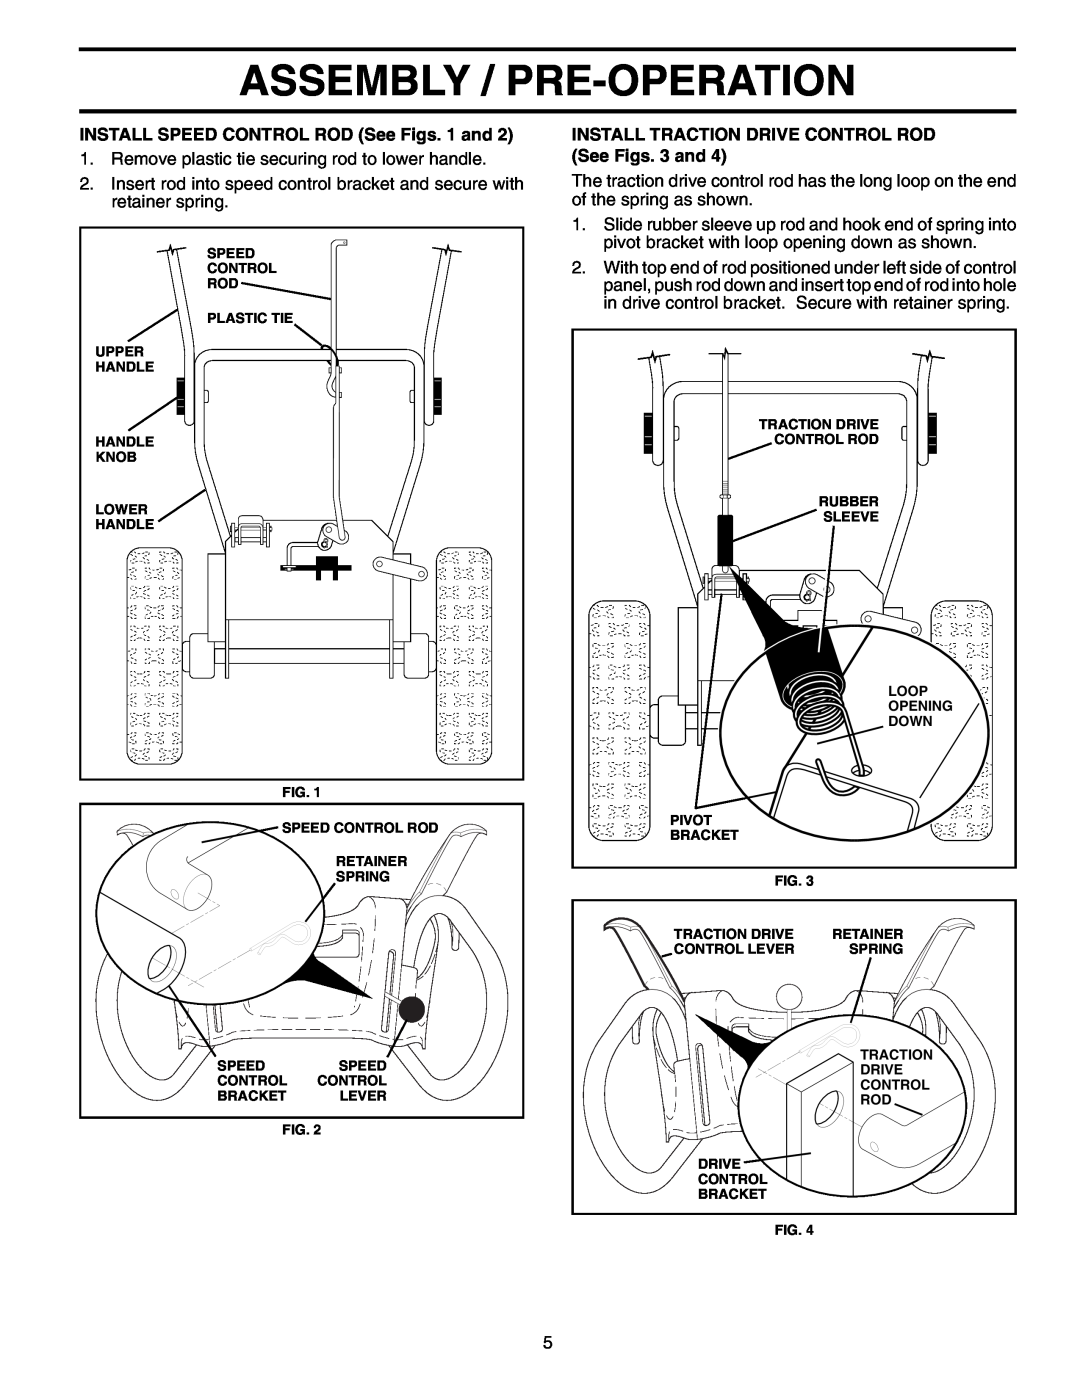 Poulan PP7527ES owner manual Assembly / Pre-Operation, INSTALL SPEED CONTROL ROD See Figs. 1 and 